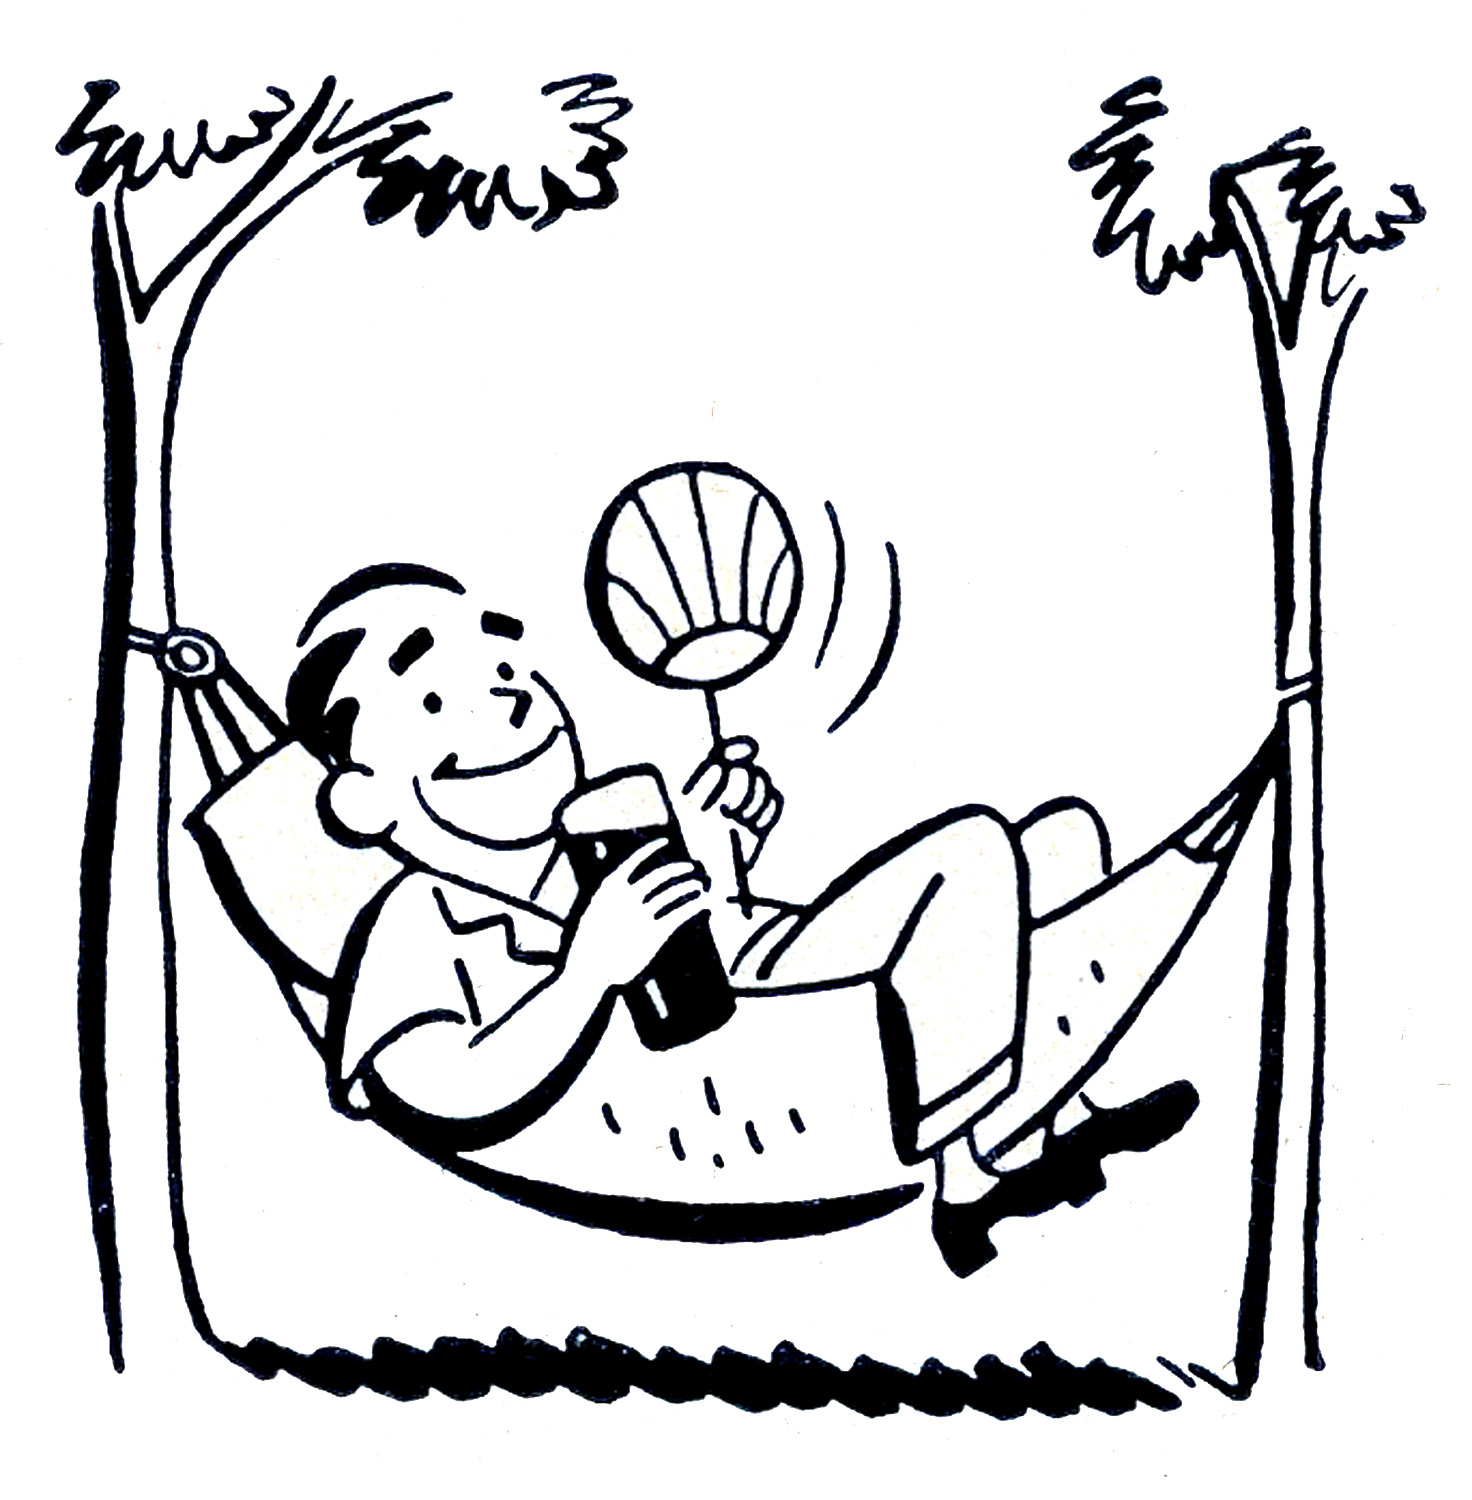 Hammock Clipart Black And White Camping 20black 20and 20white